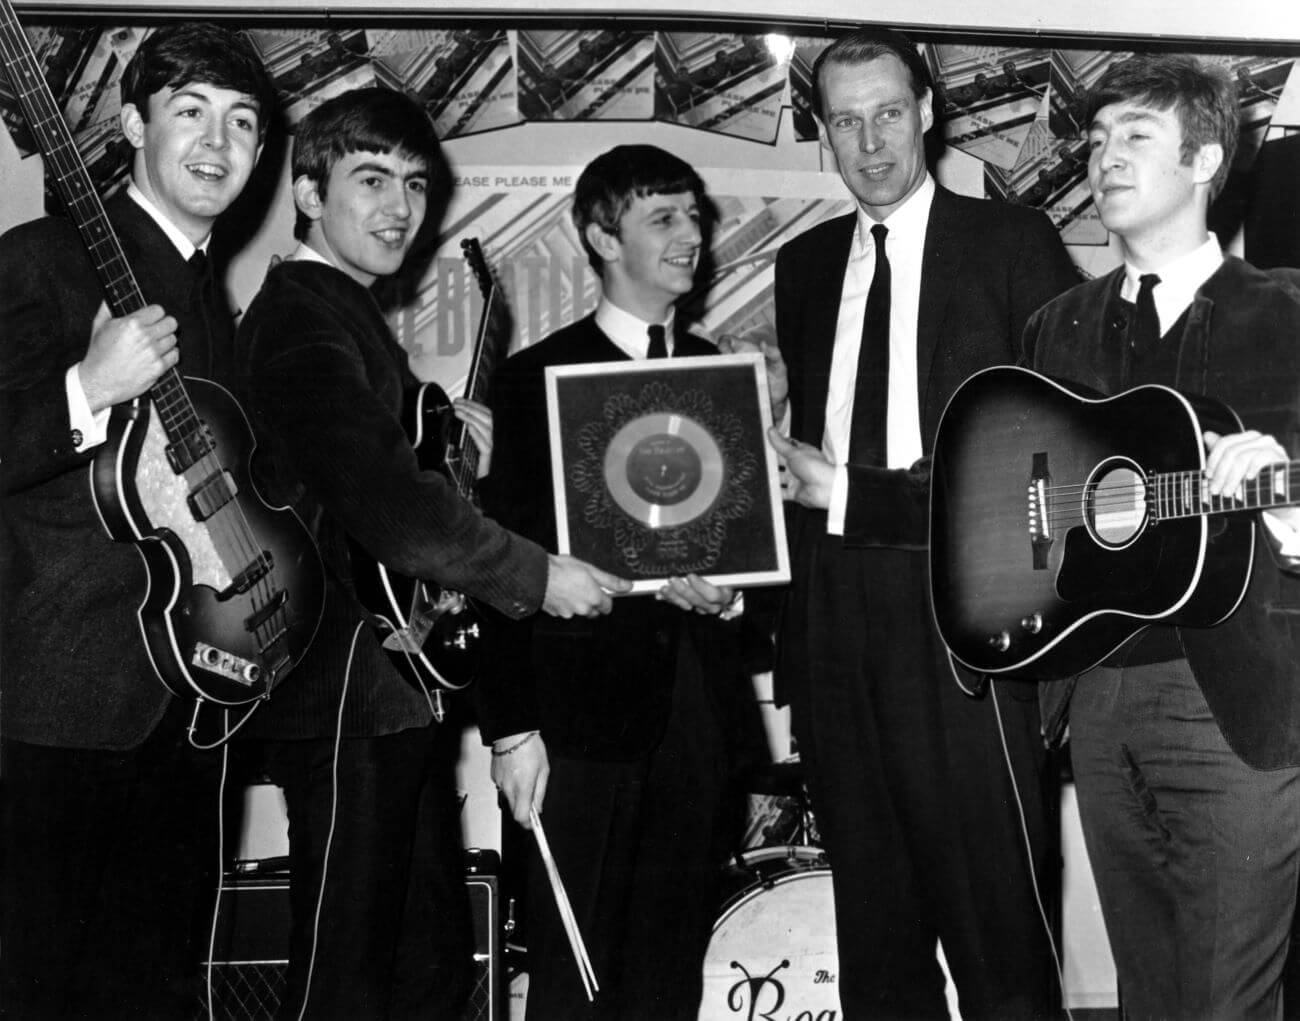 A black and white picture of Paul McCartney, George Harrison, Ringo Starr, George Martin, and John Lennon. John Lennon, George Harrison, and Paul McCartney hold guitars. Ringo Starr holds a record.